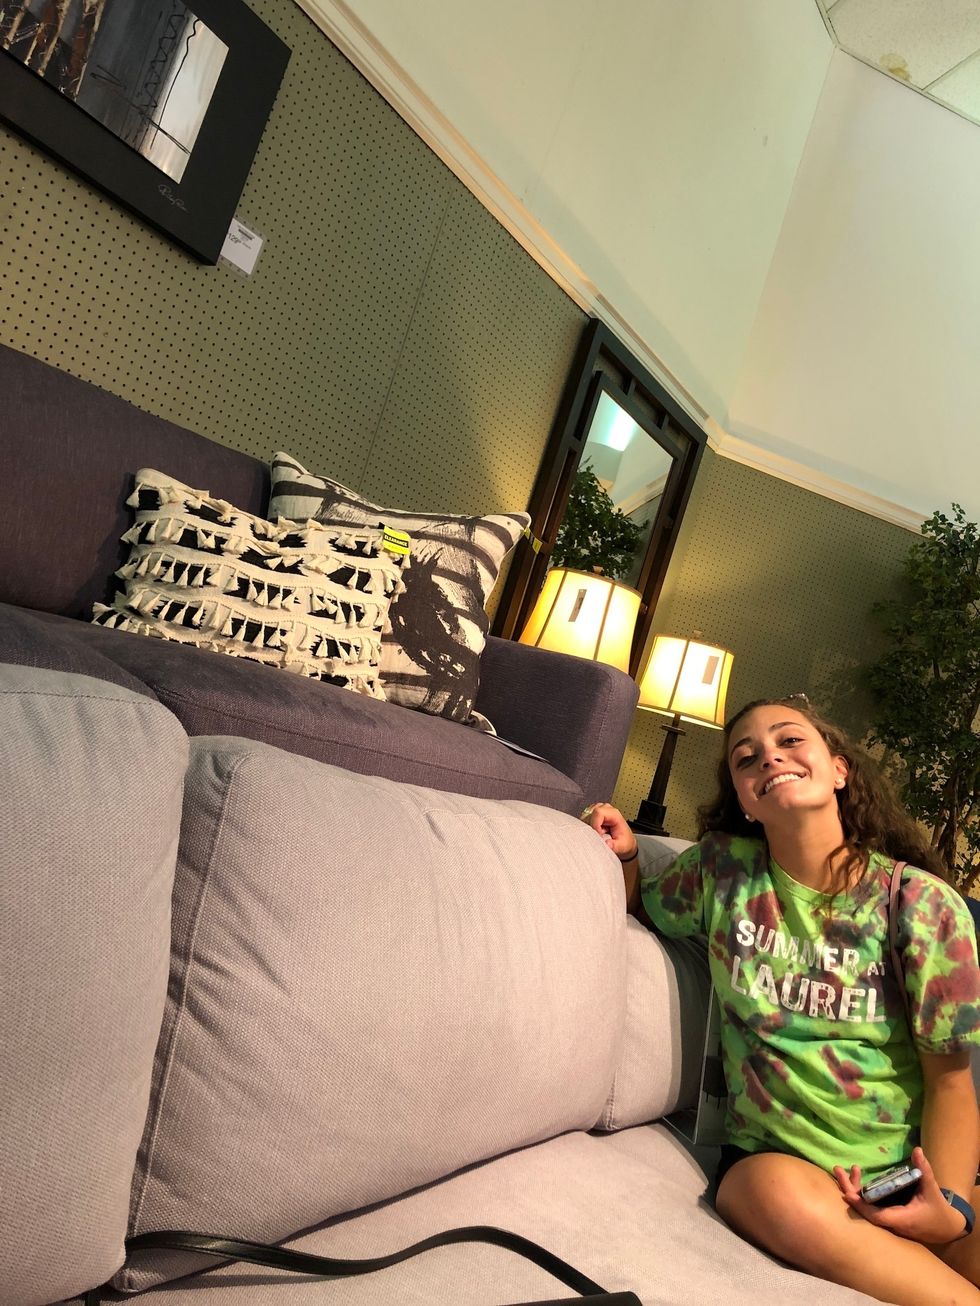 What You Need To Know About Decorating Your College Apartment On A *Very* College Budget